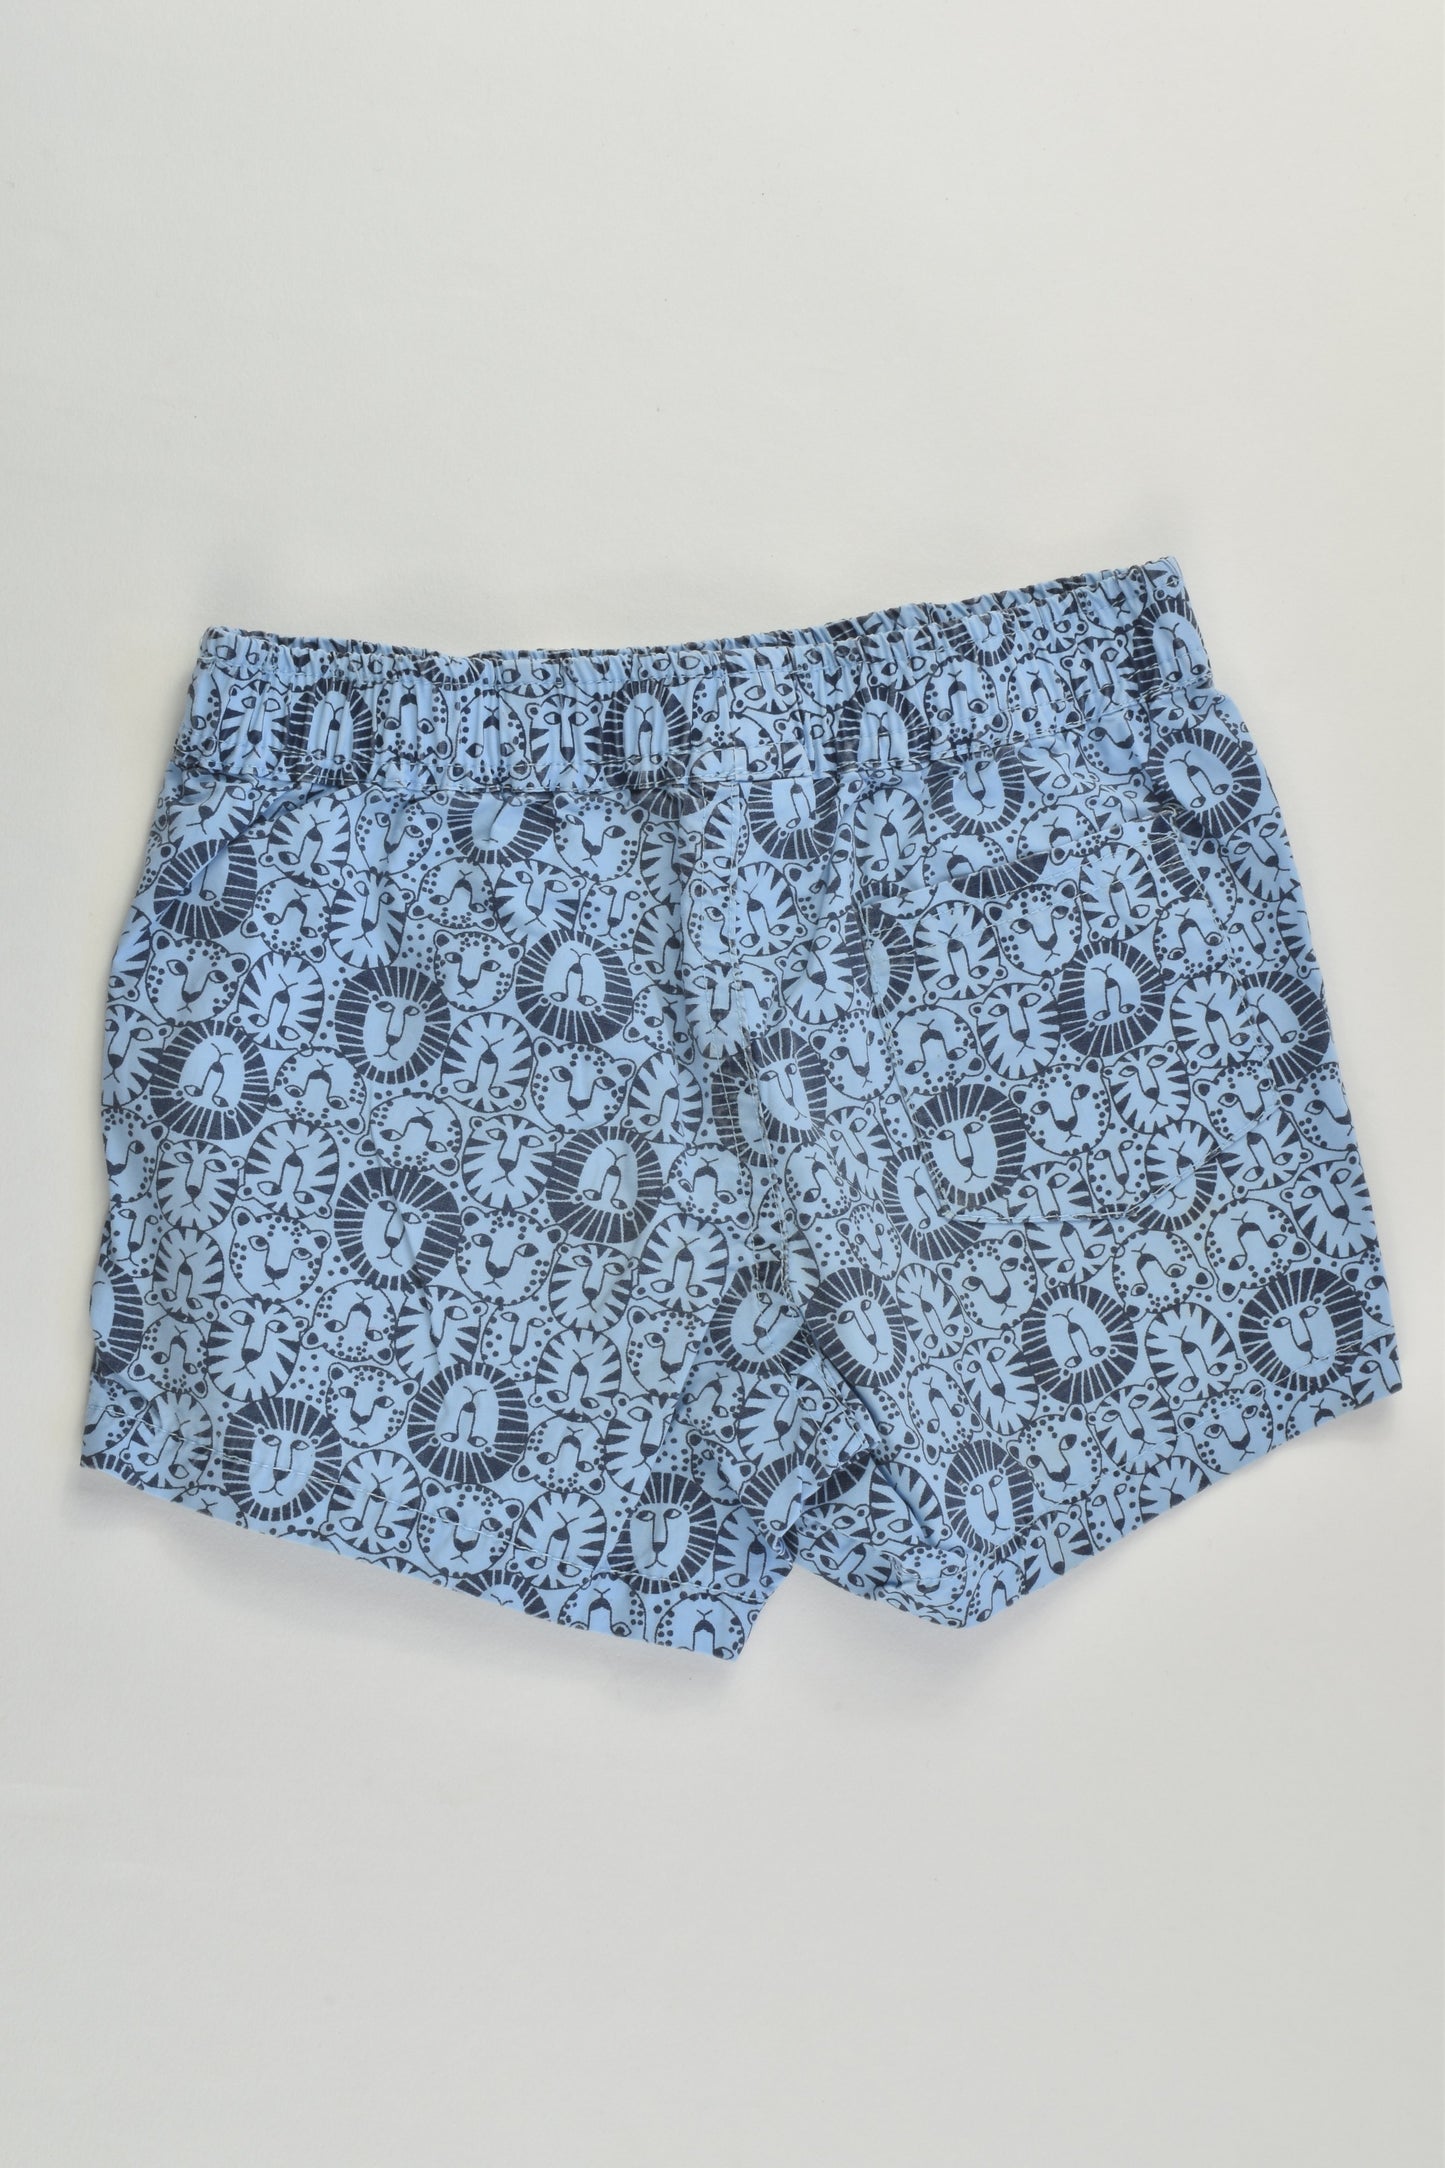 Target Size 00 (3-6 months) Lions and more Lightweight Shorts